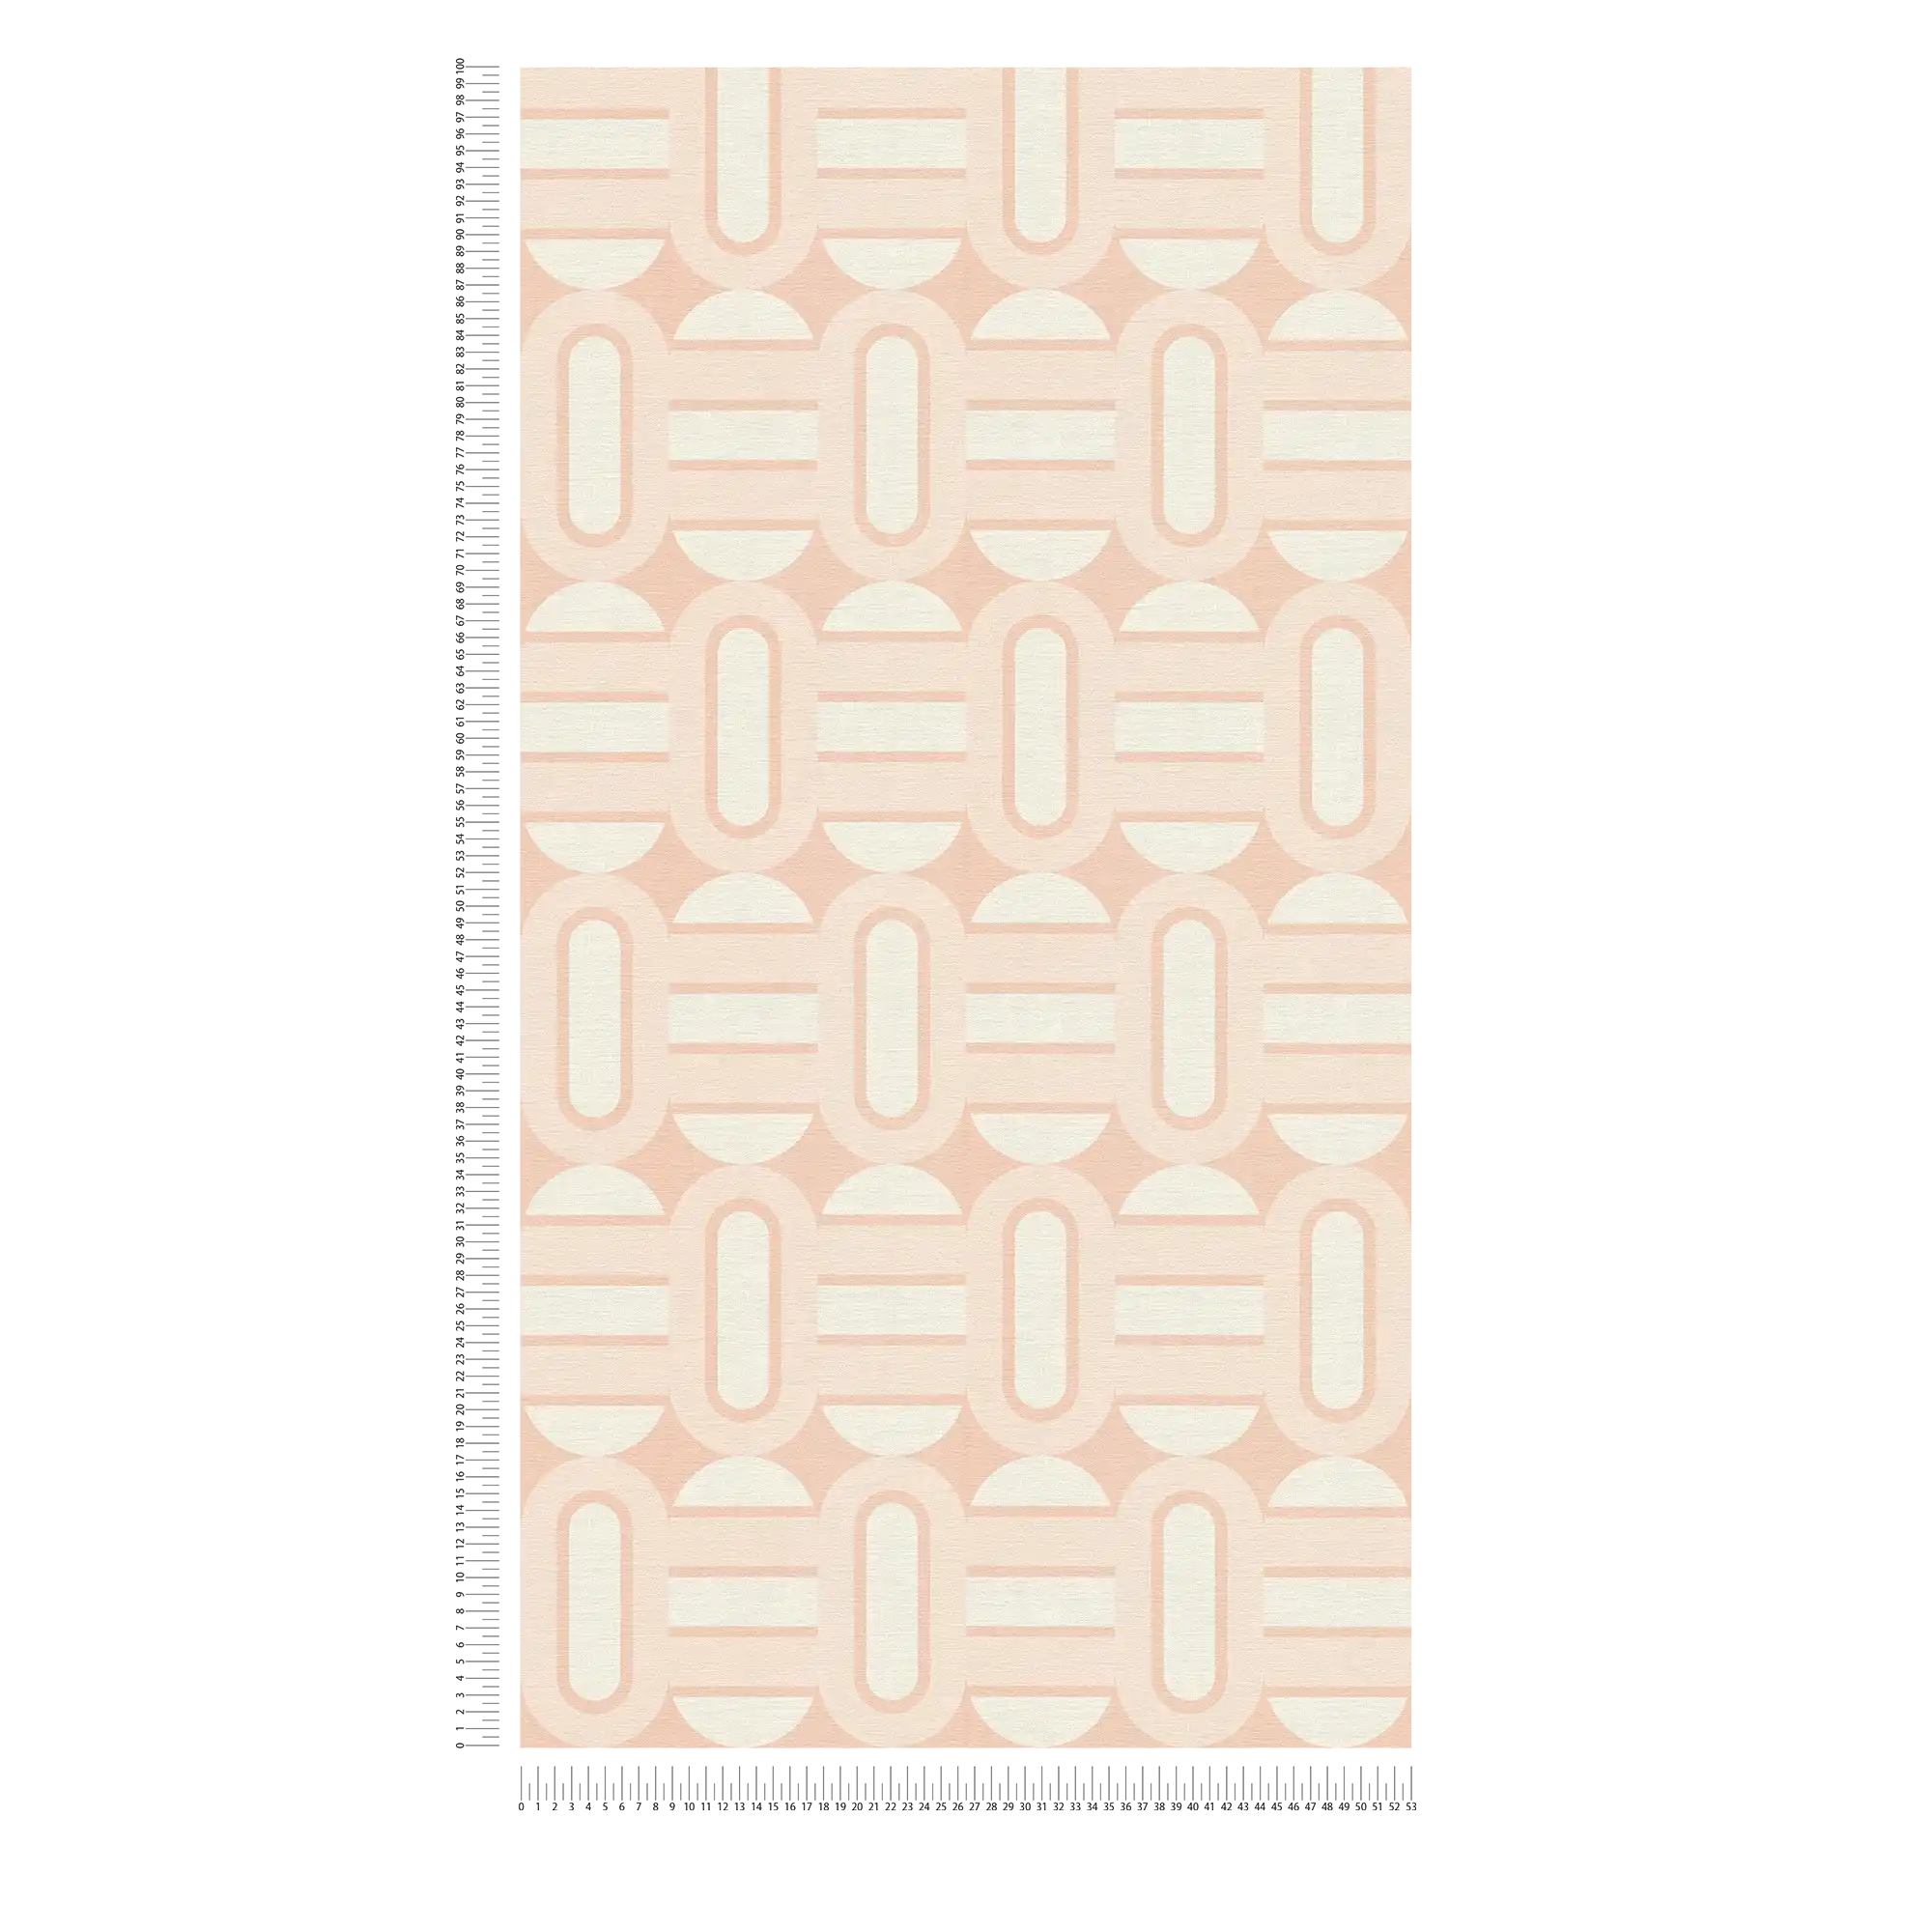             Soft Pink Tones in Retro Pattern with Ovals and Bars - Beige, Cream, Pink
        